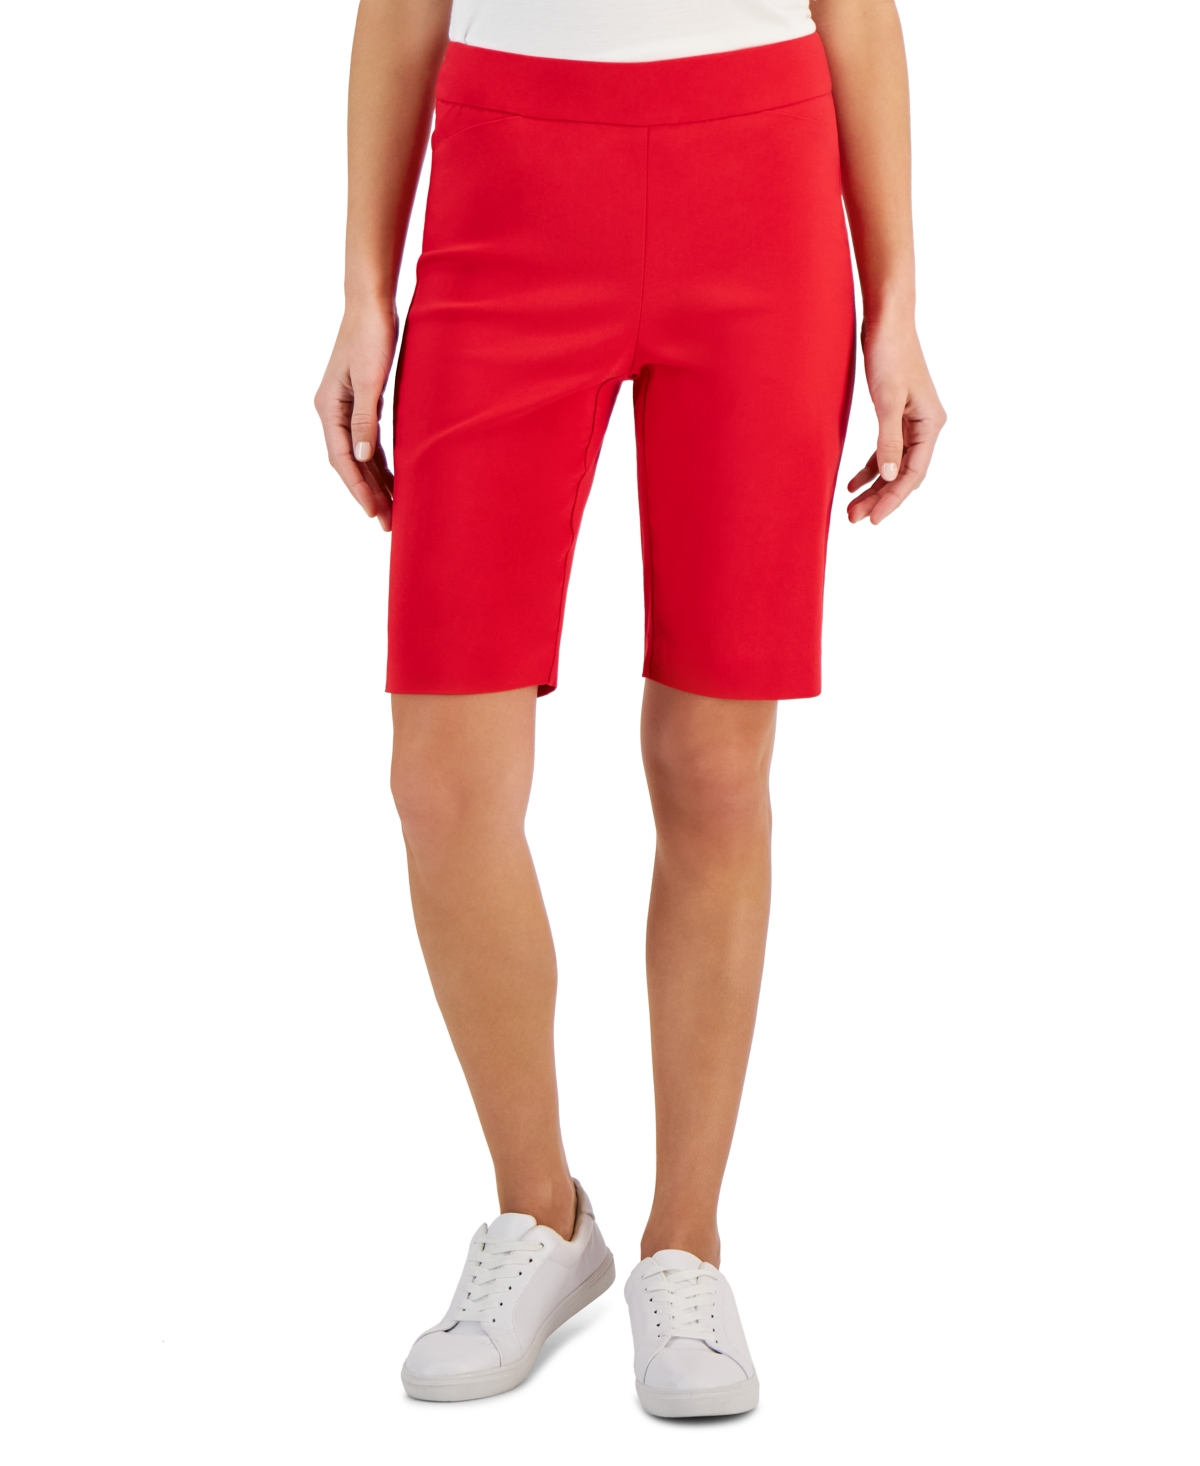 Red Shorts for Women - Macy's